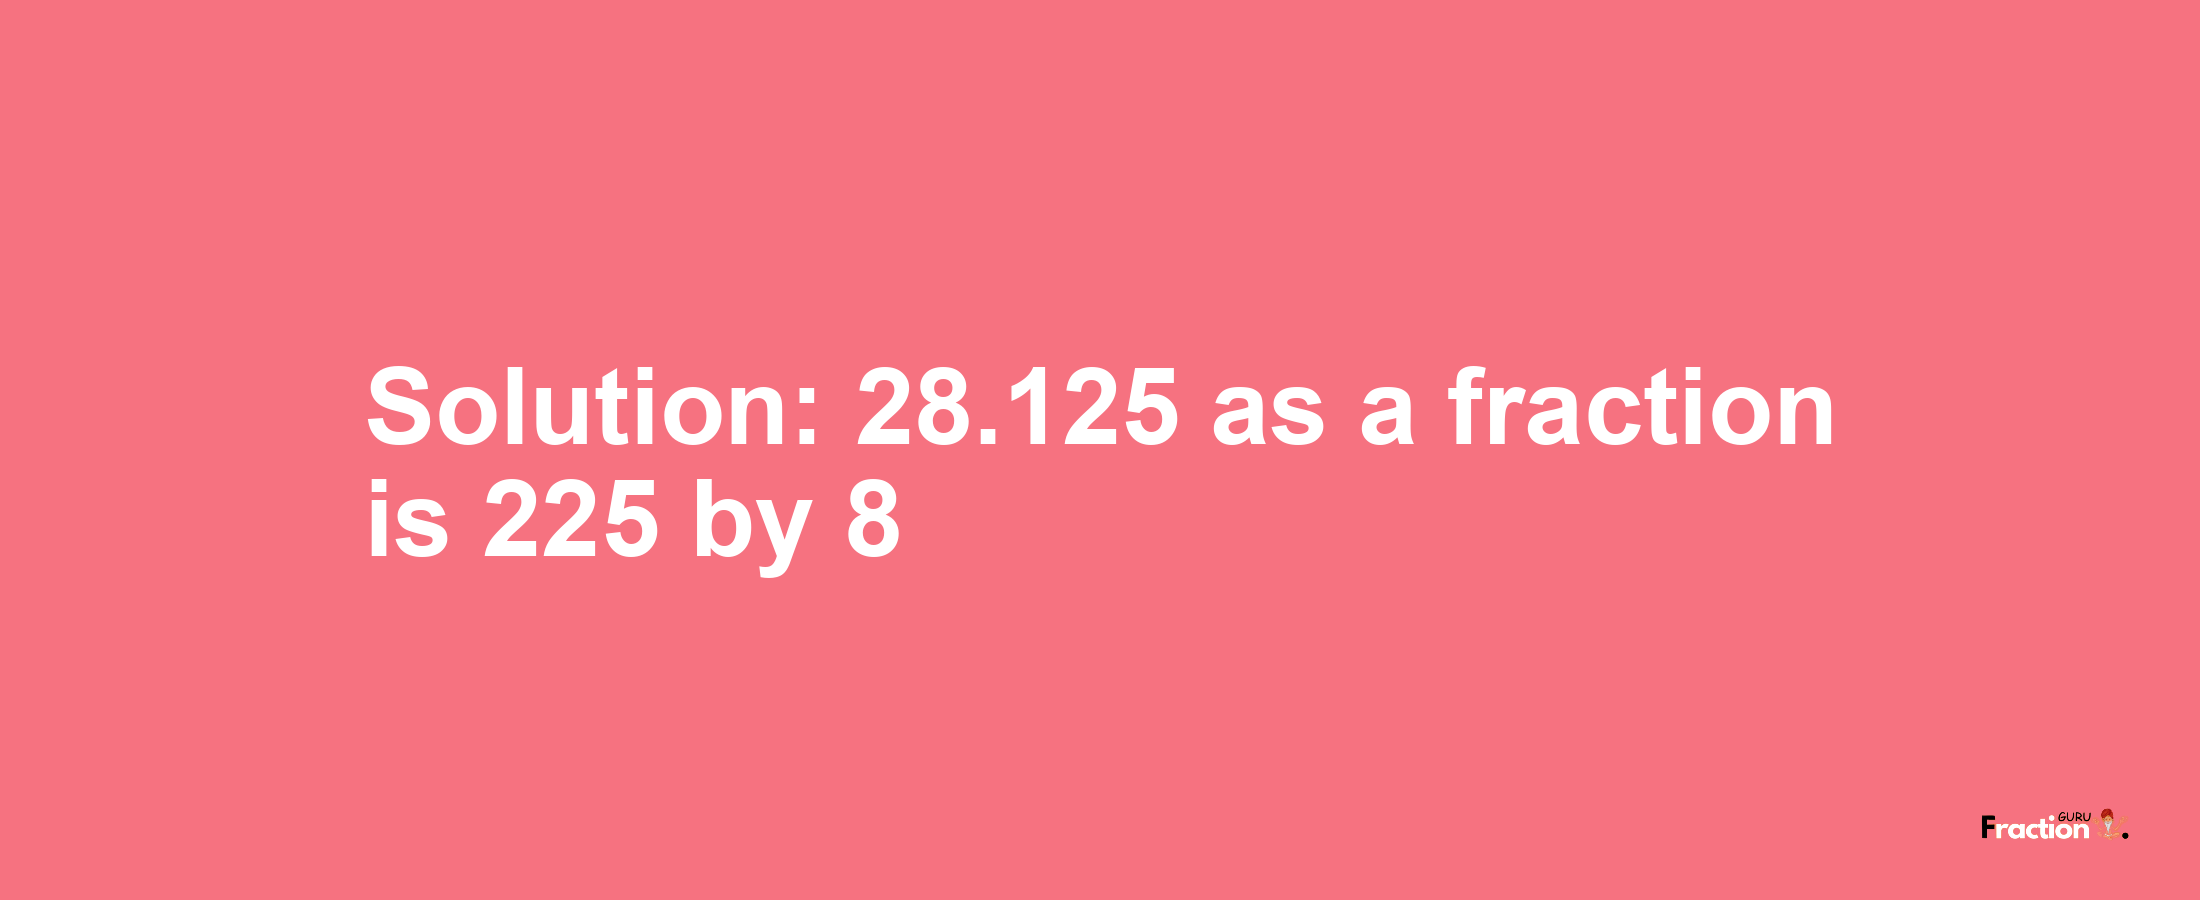 Solution:28.125 as a fraction is 225/8